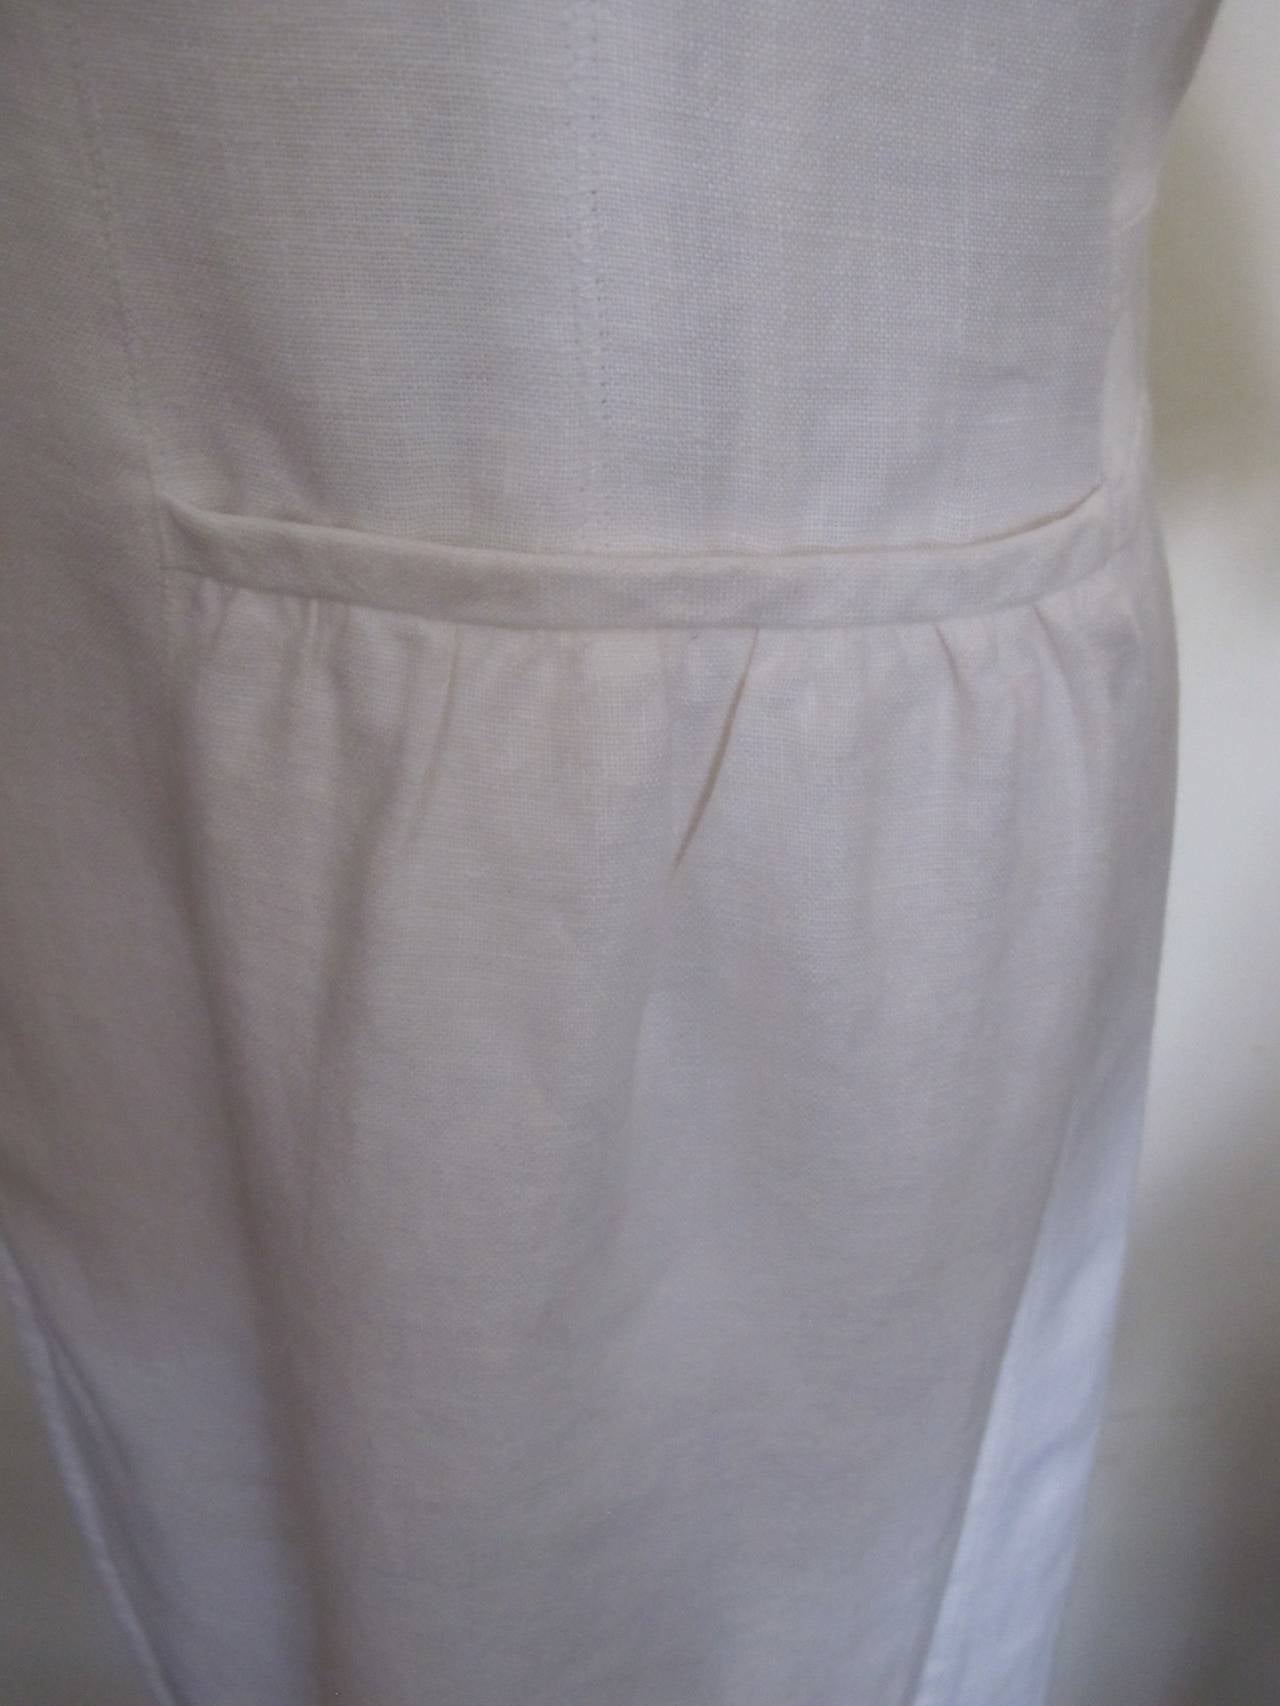 Vivienne Tam 1990's White Linen Dress with Silver Buddha Medallions For Sale 1